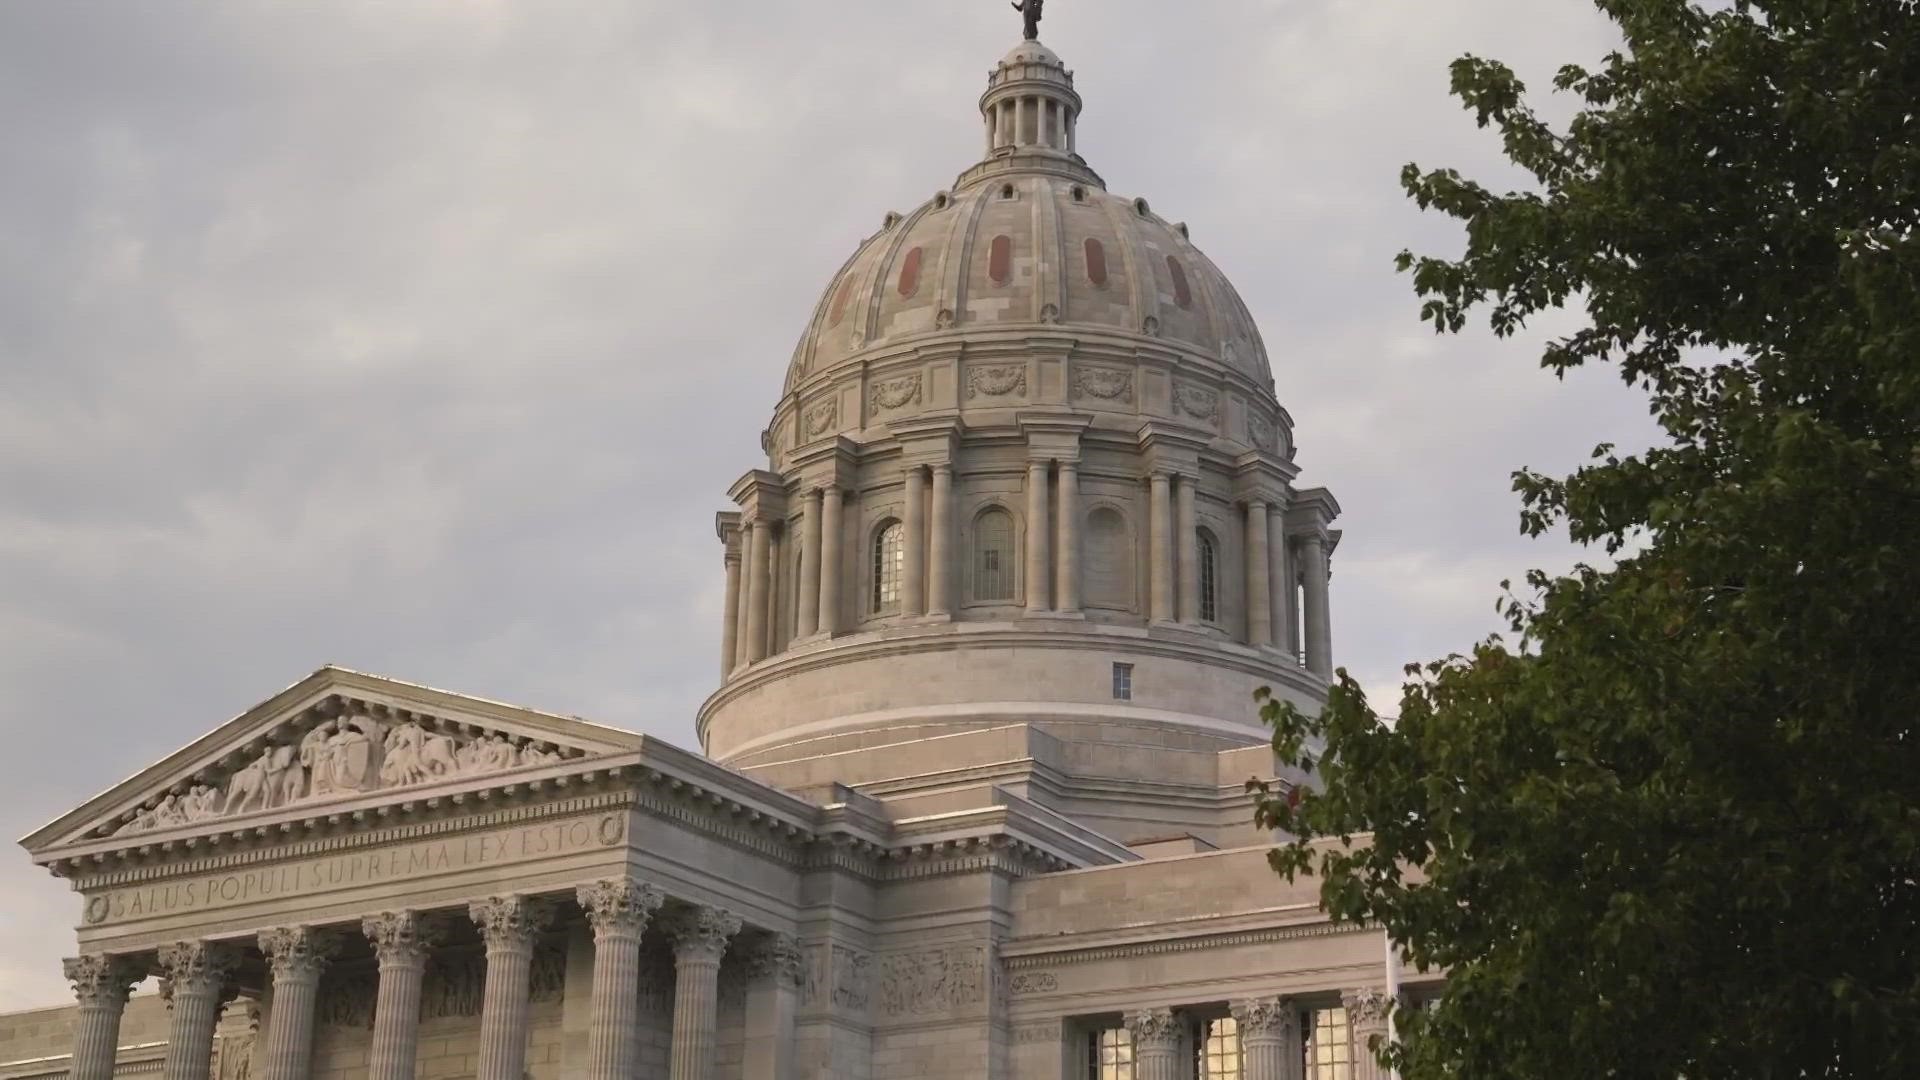 A push to slash Missouri's personal property tax has stalled in the Senate. The proposal could put money back in pockets but comes at a steep cost.